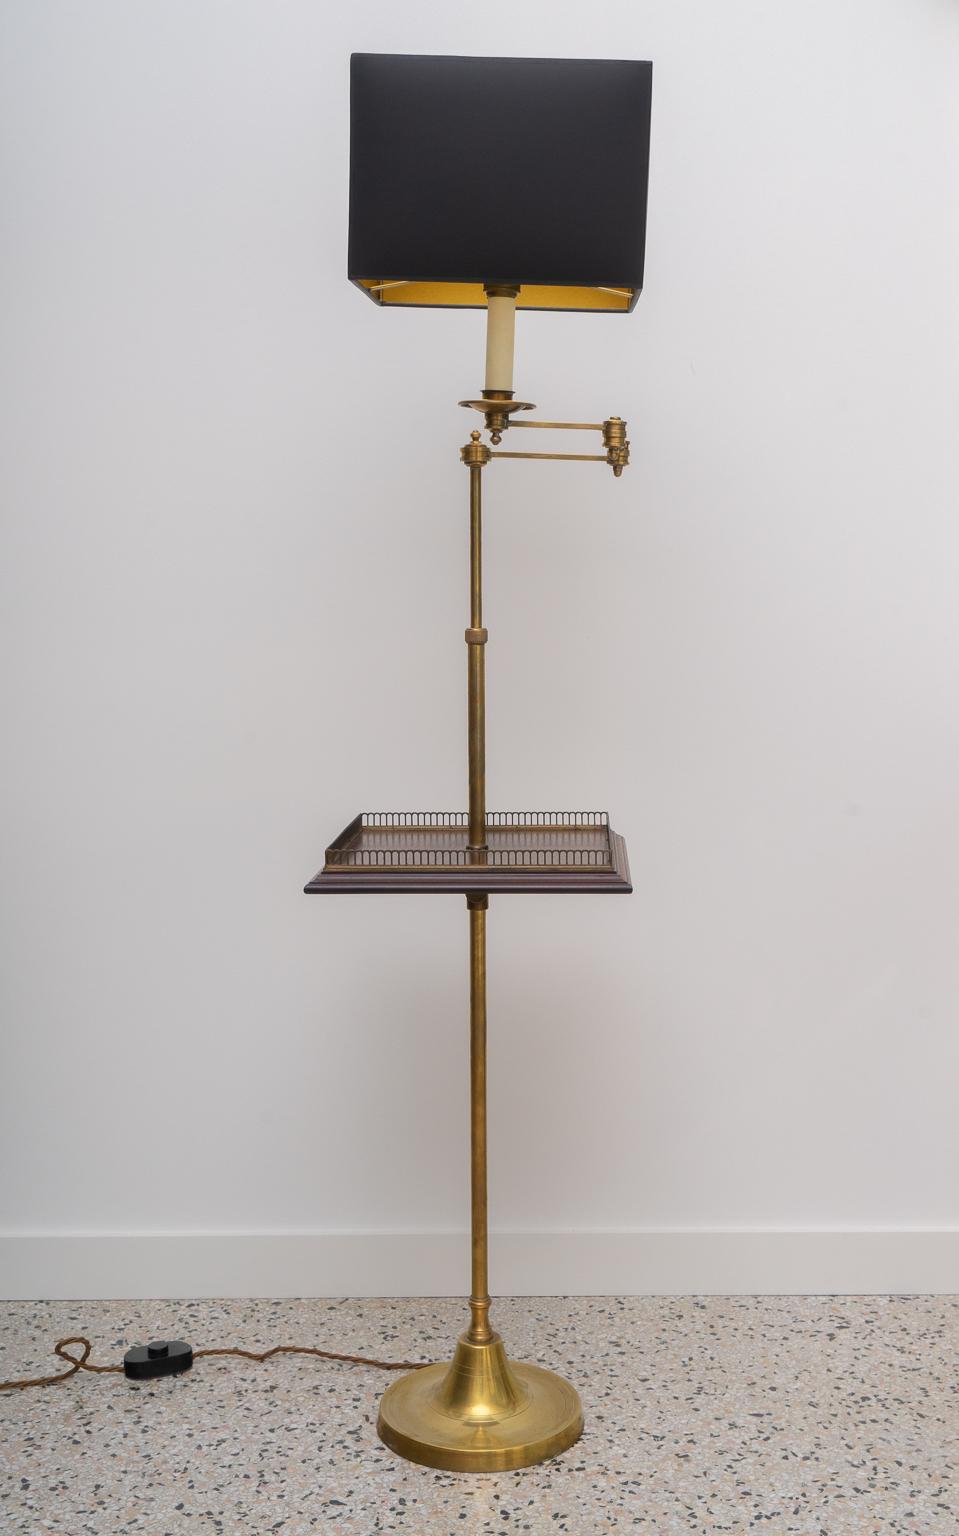 This stylish and Classic floor lamp was created by Vaughan design and dates to the 1990s. The antique brass, mahogany woods and paper shade all work beautifully together. The adjustable arm works with ease to give you that perfect positioning of the